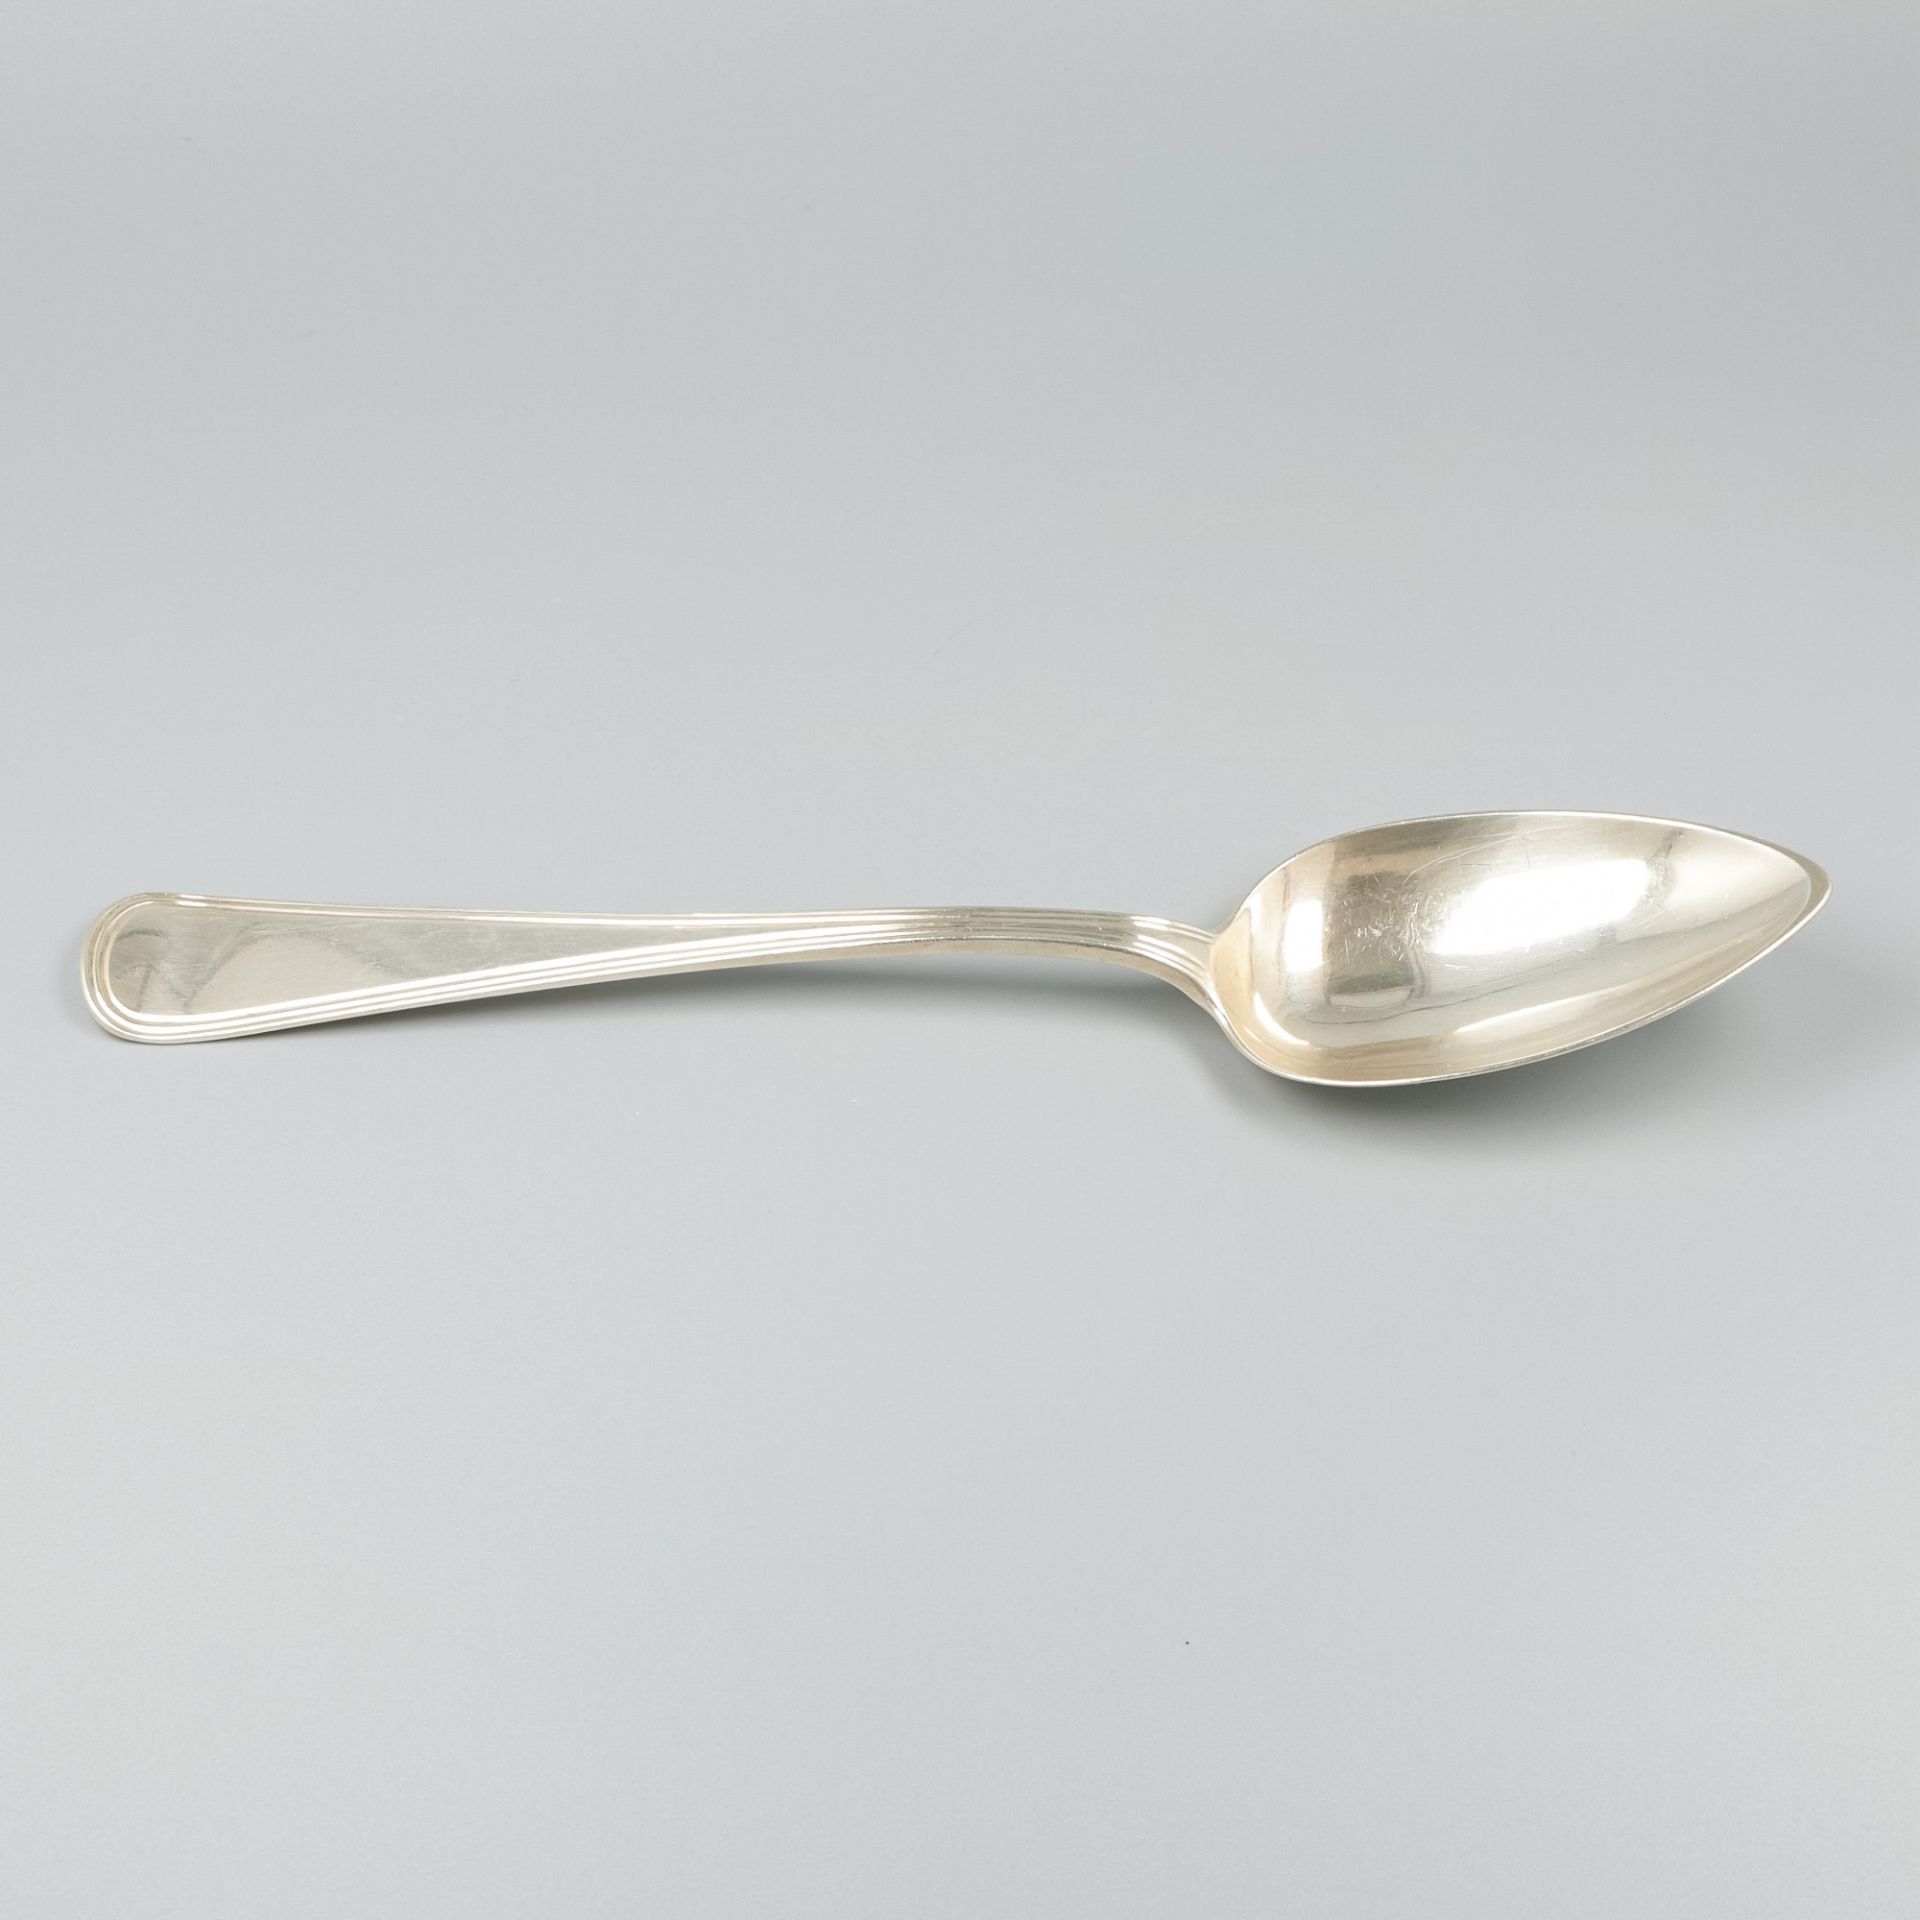 Vegetable serving spoon "Hollands Rondfilet",  silver. - Image 3 of 6